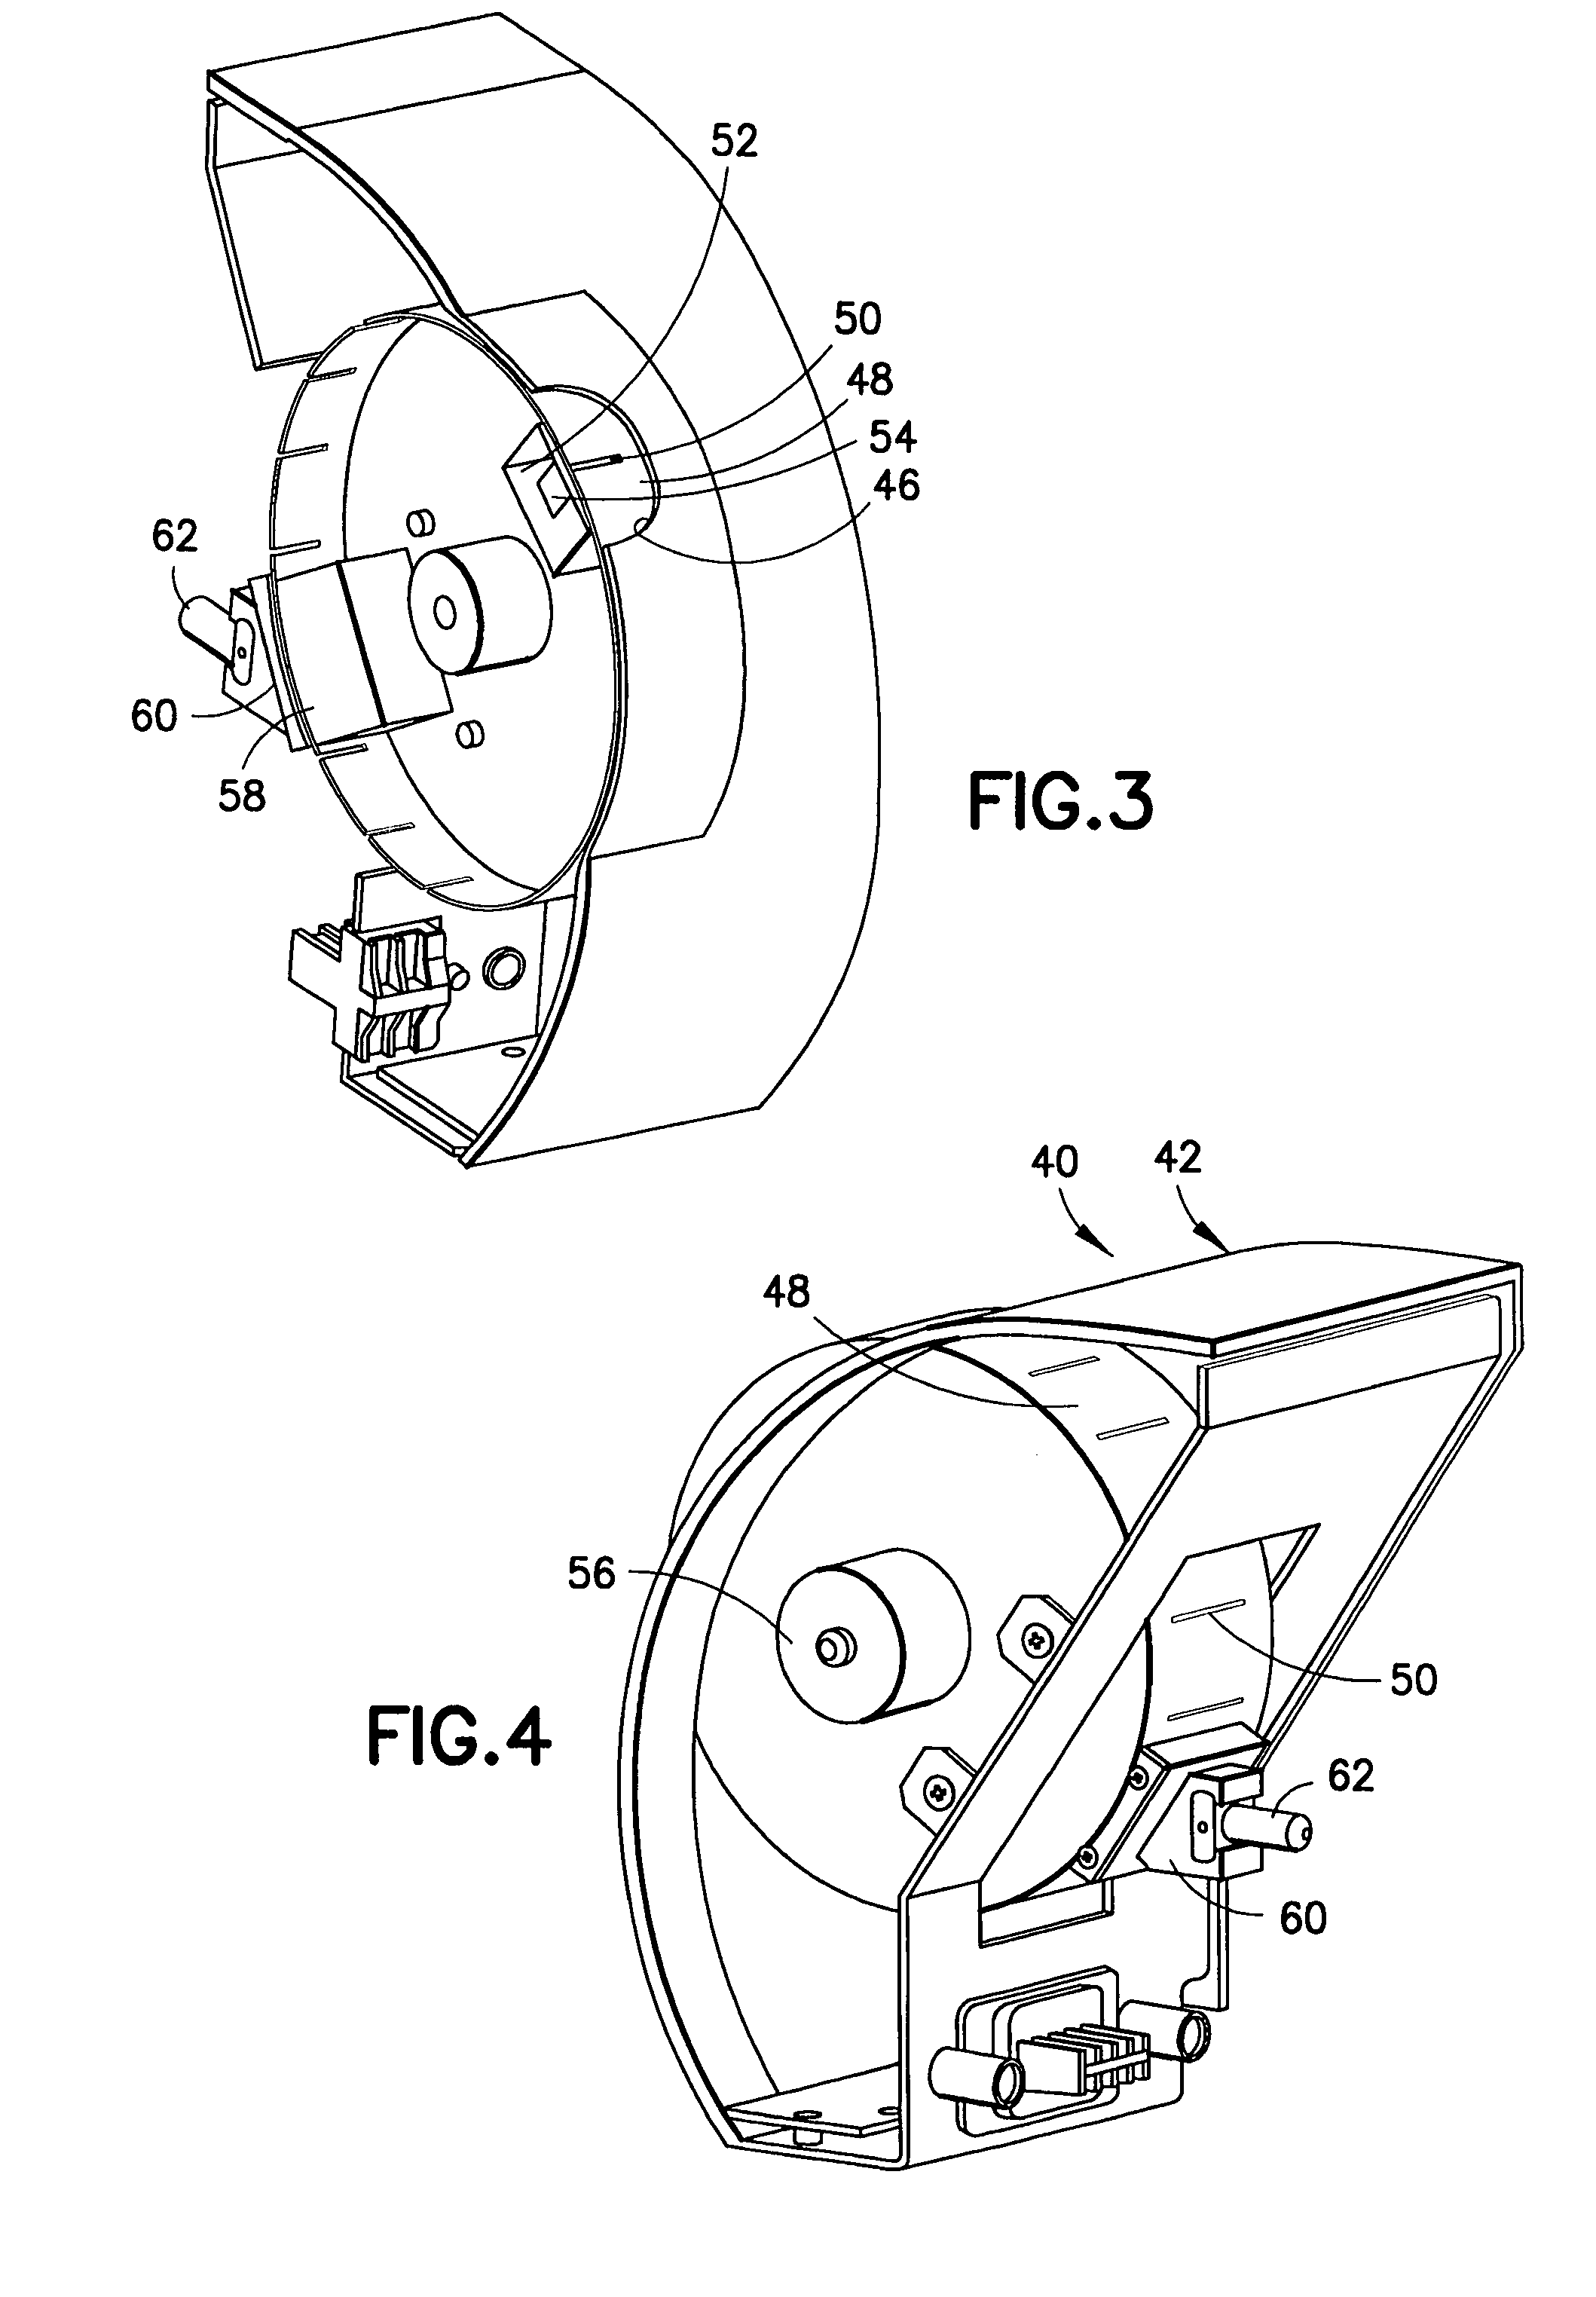 Device for testing traces of explosives and/or drugs